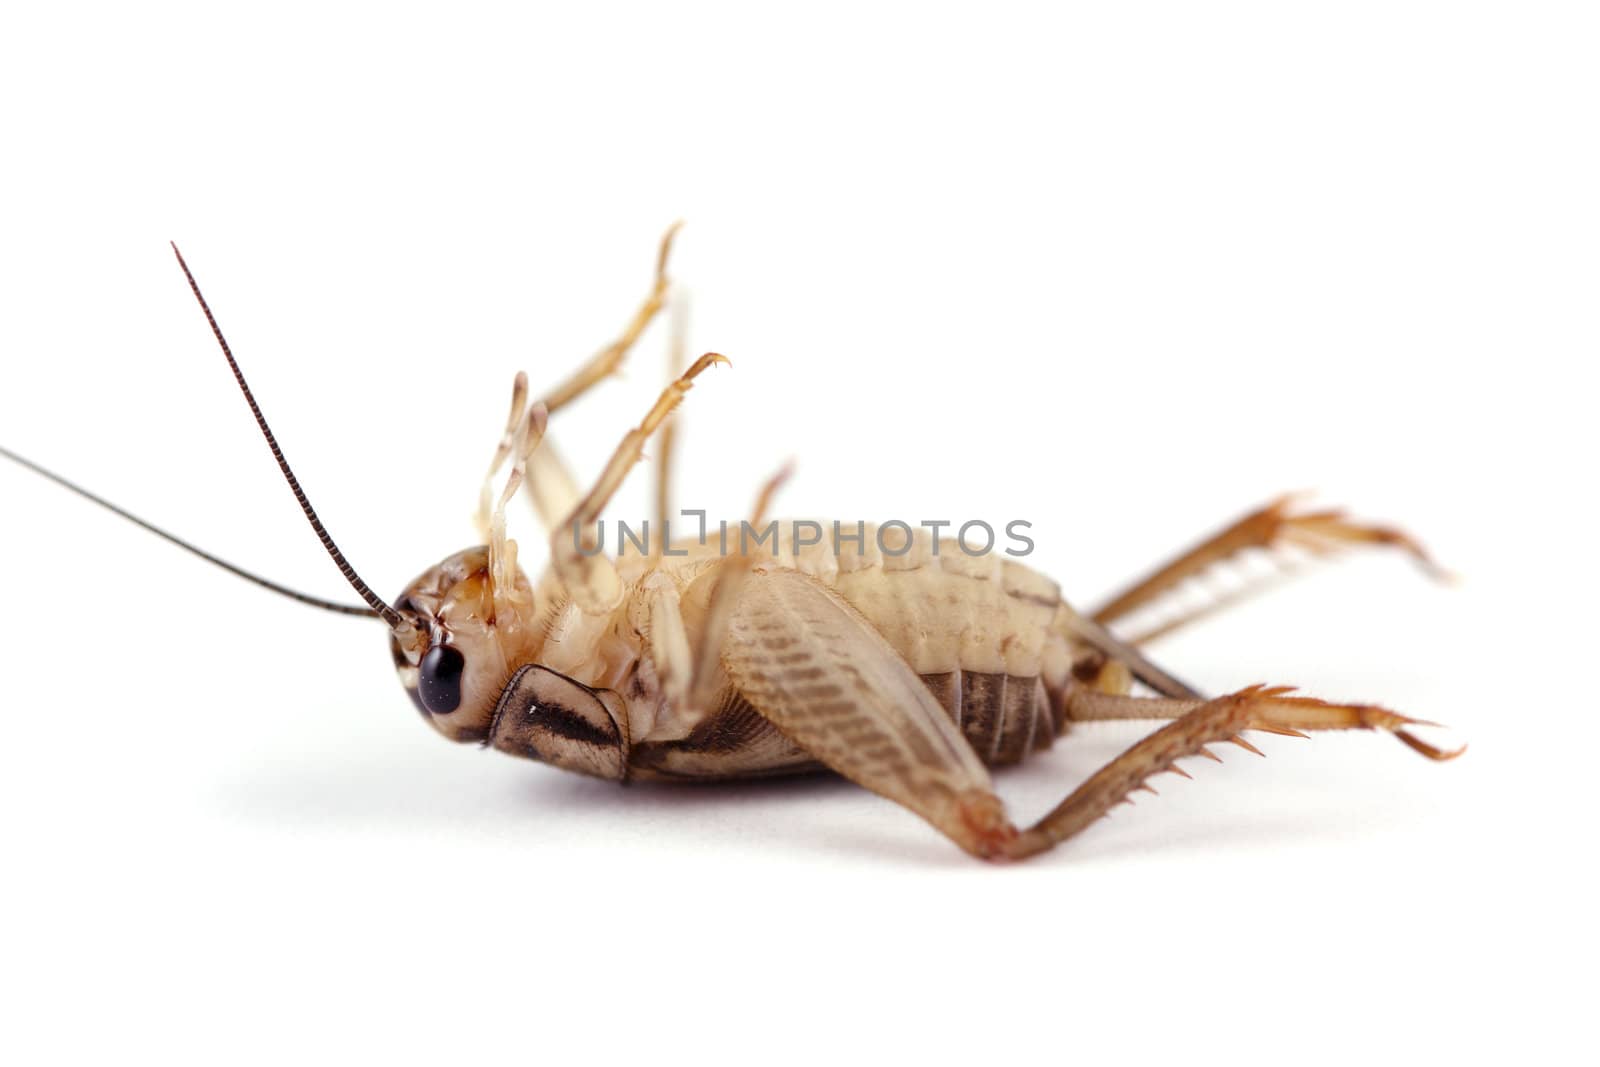 A side view of a dead cricket (Acheta Domestica) shot on a white background.